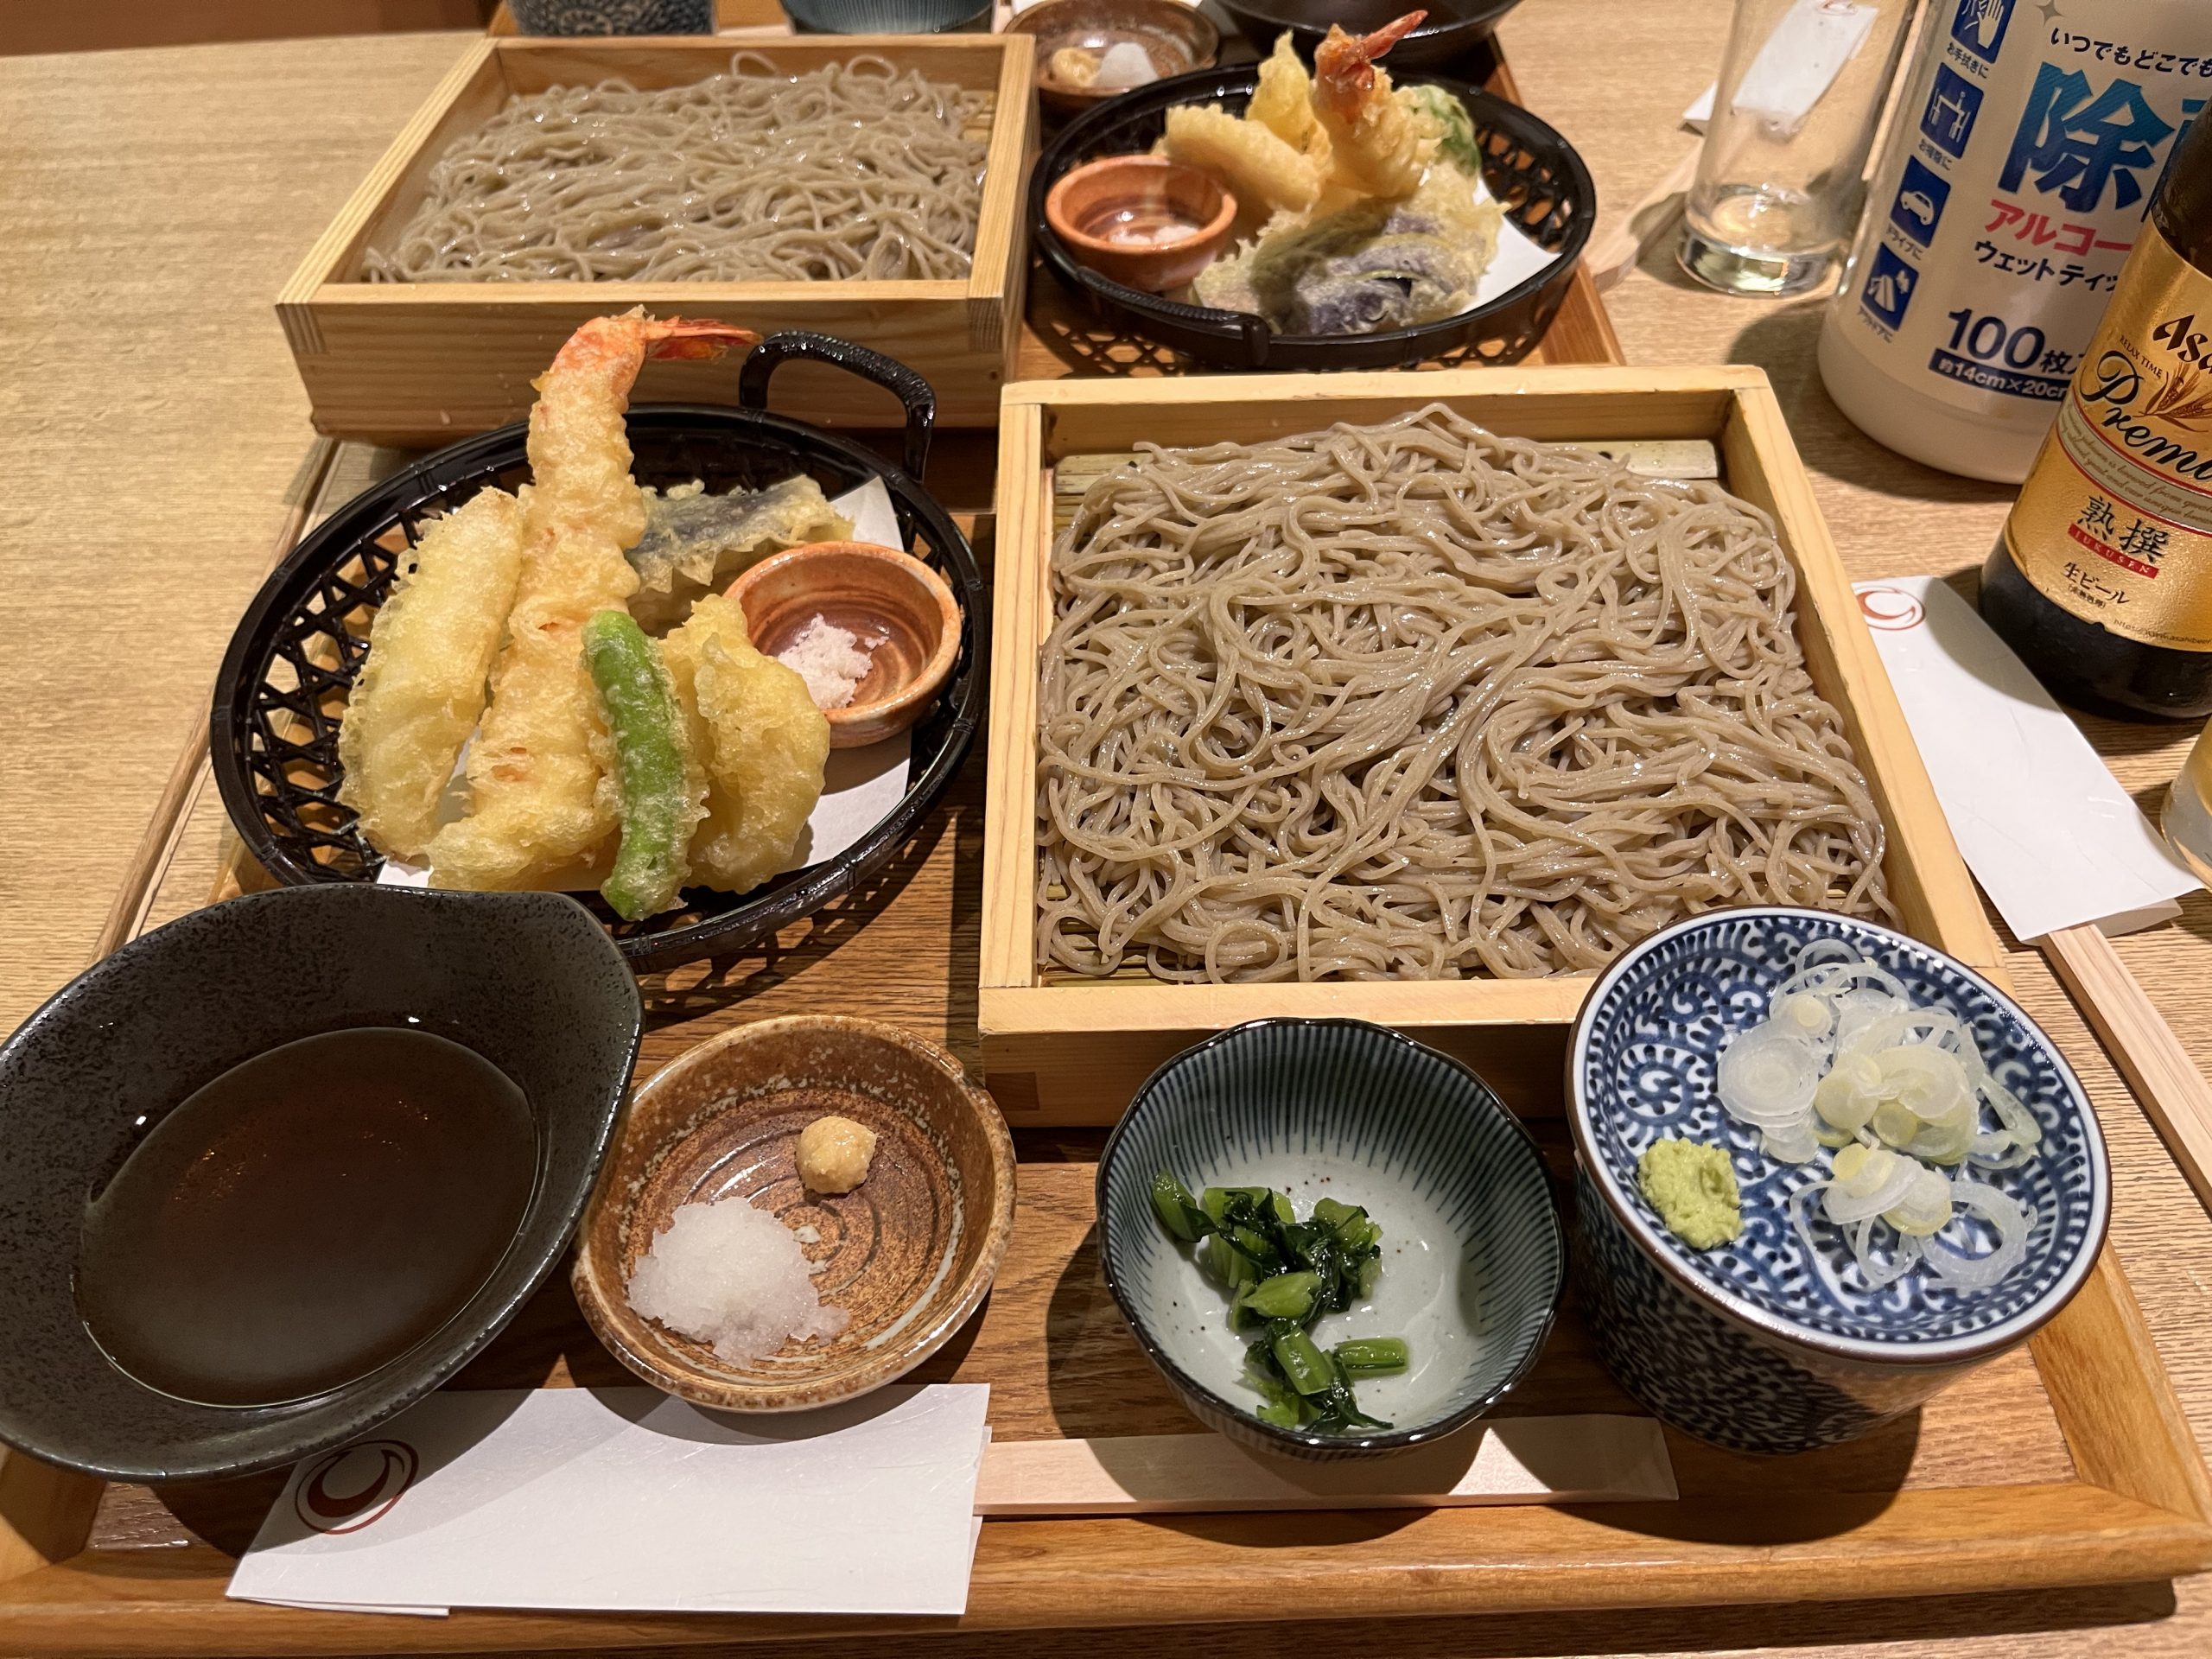 Beautiful and delicious meal with tempura and sauce on the side in a restaurant in central Tokyo